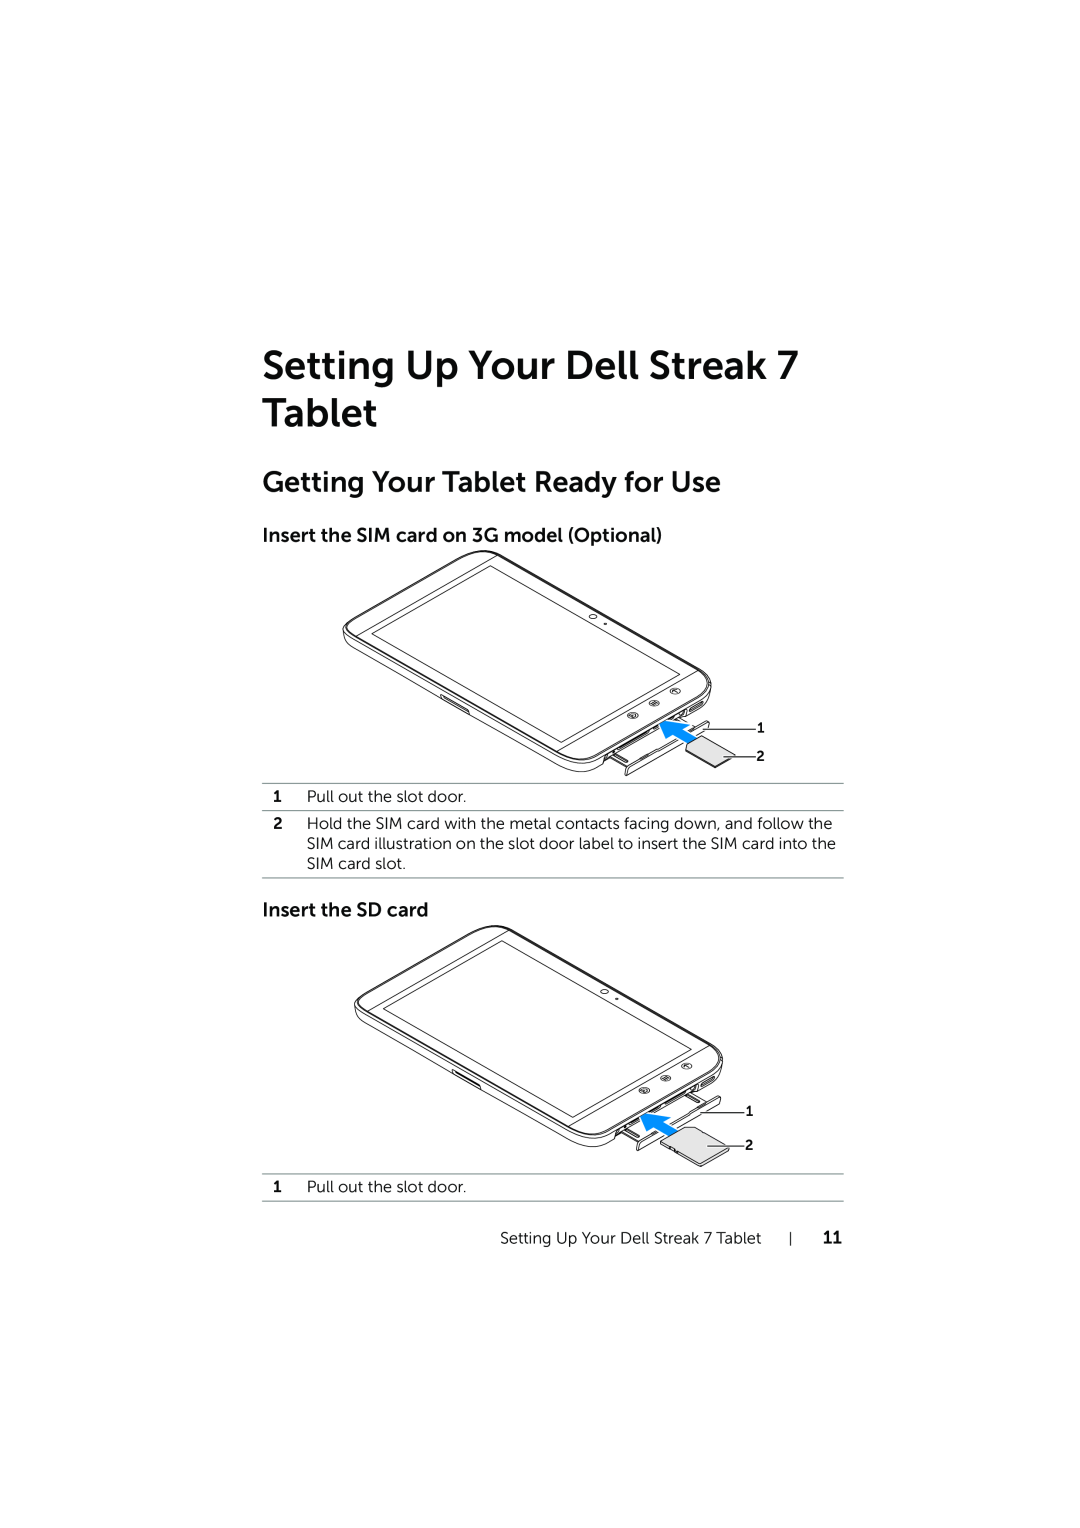 Dell LG7_bk0 user manual Setting Up Your Dell Streak 7 Tablet, Getting Your Tablet Ready for Use, Insert the SD card 